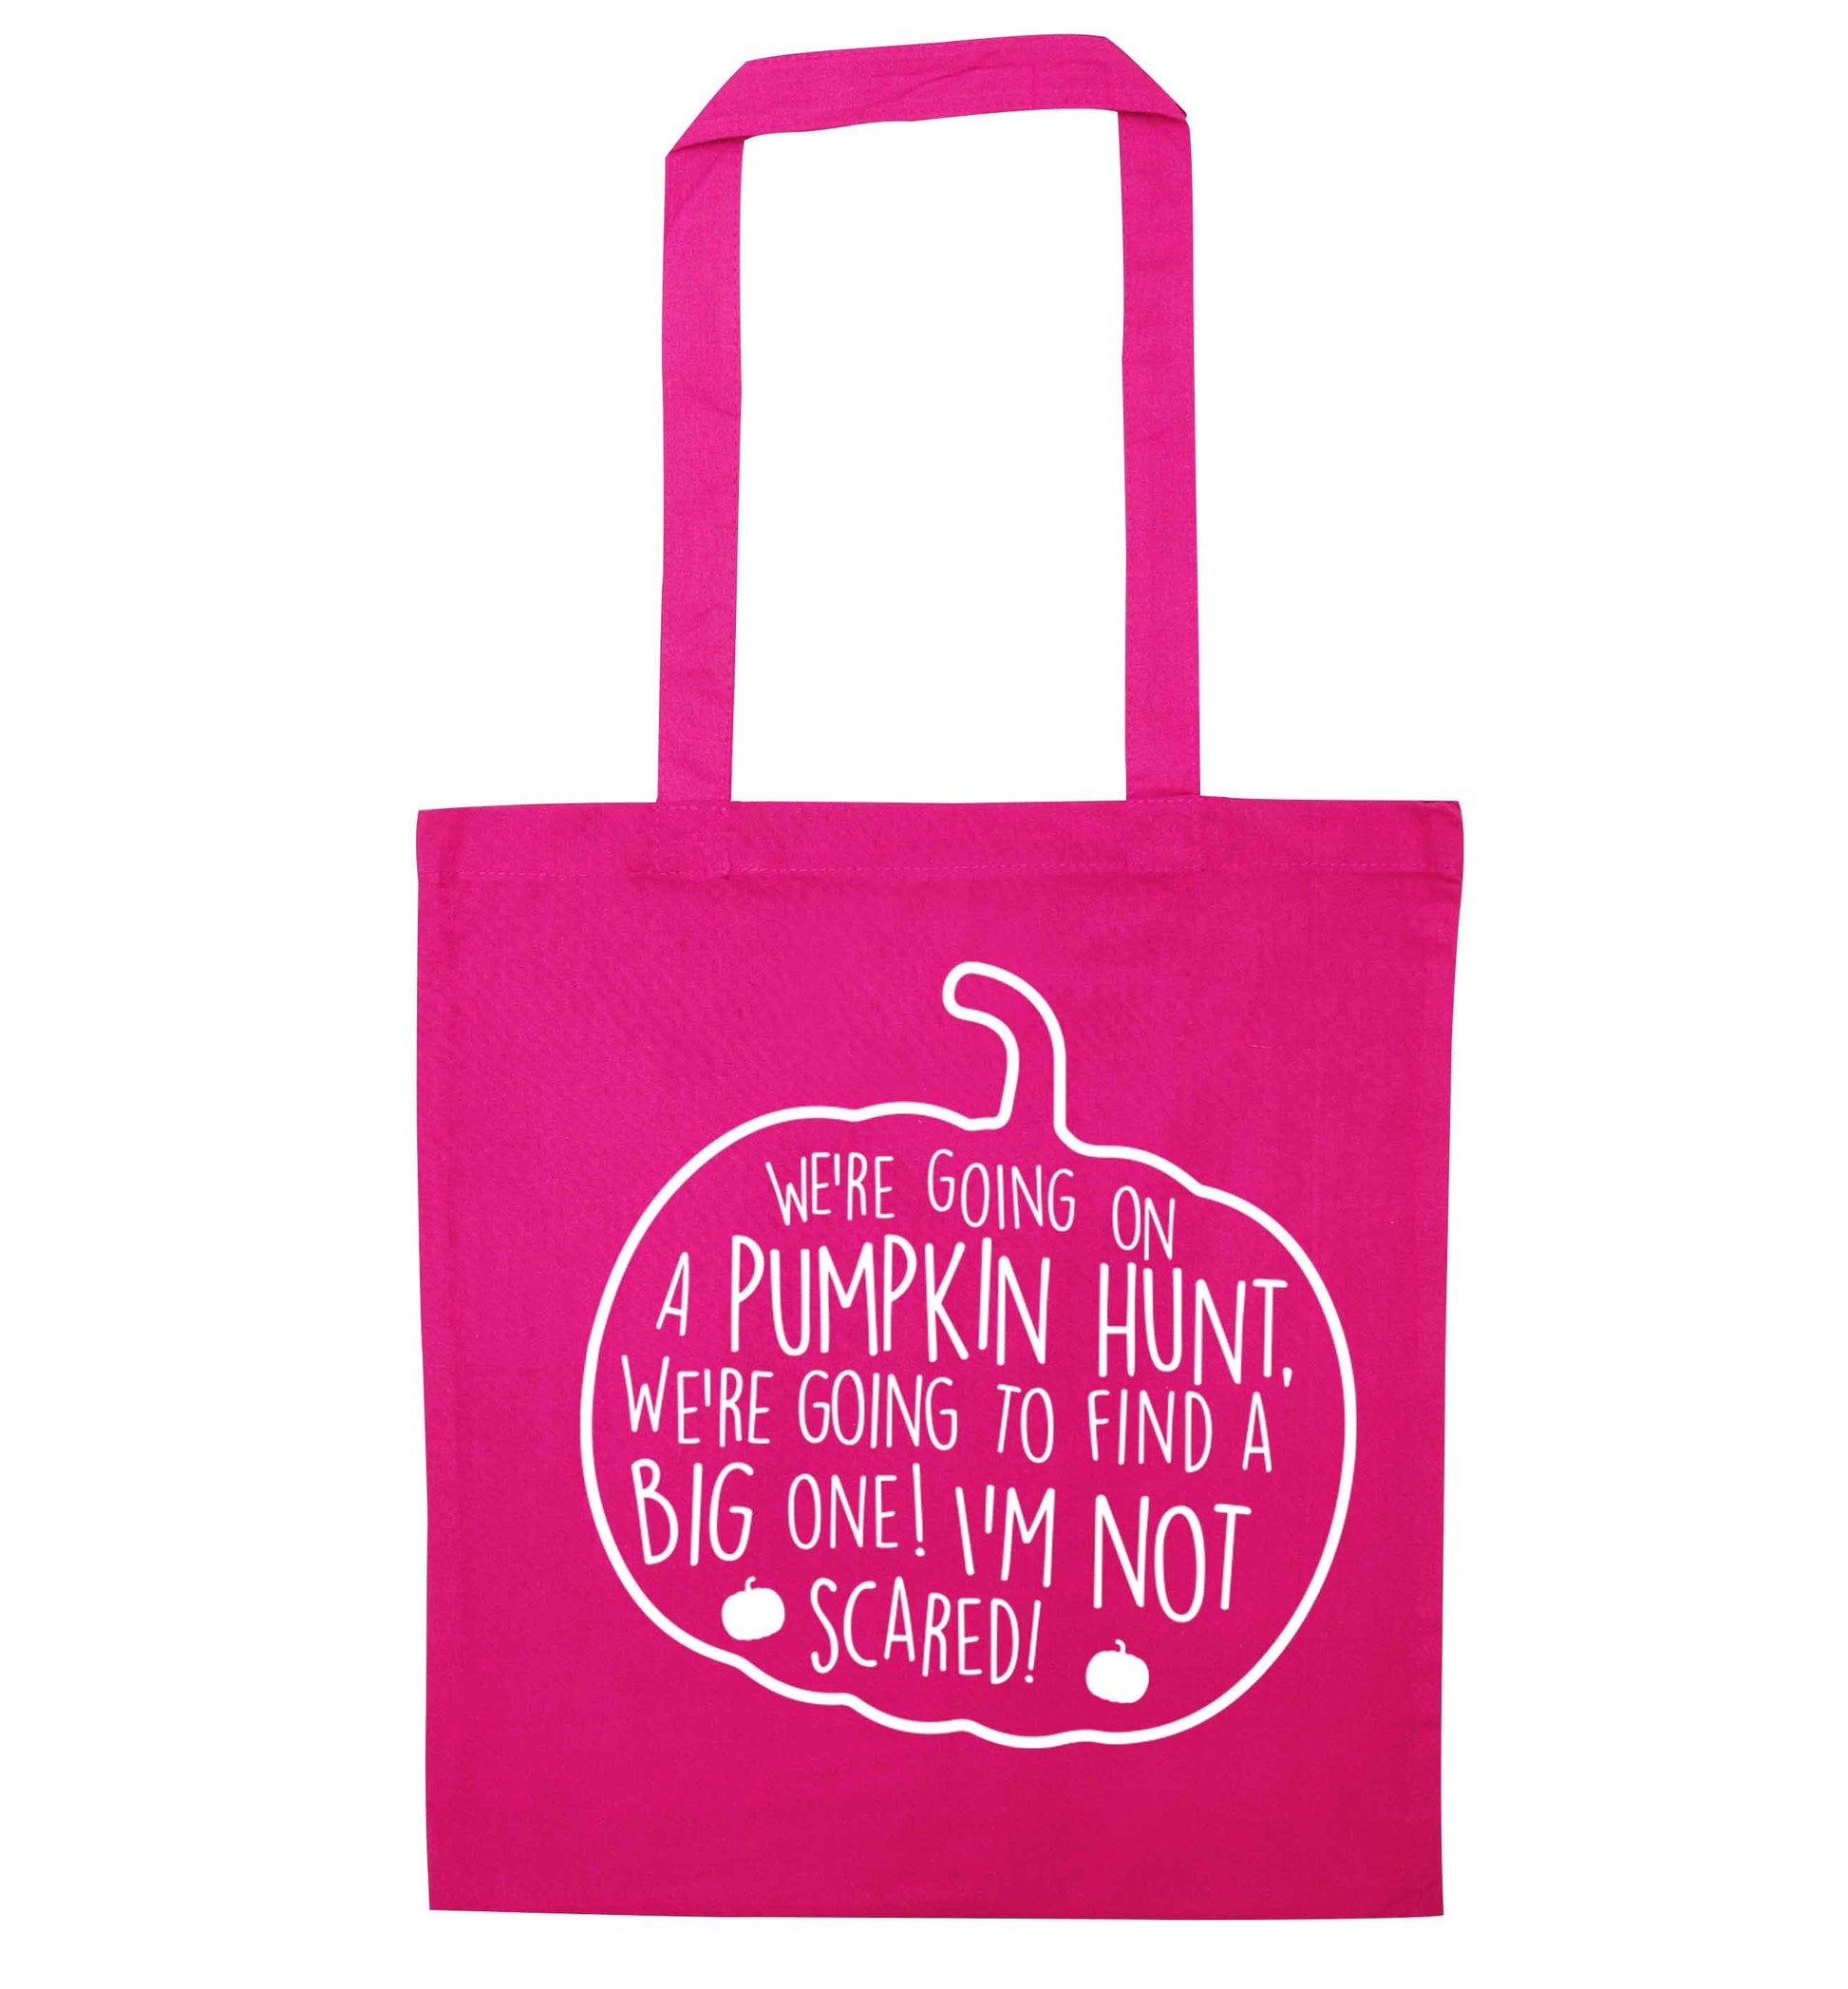 We're going on a pumpkin hunt pink tote bag